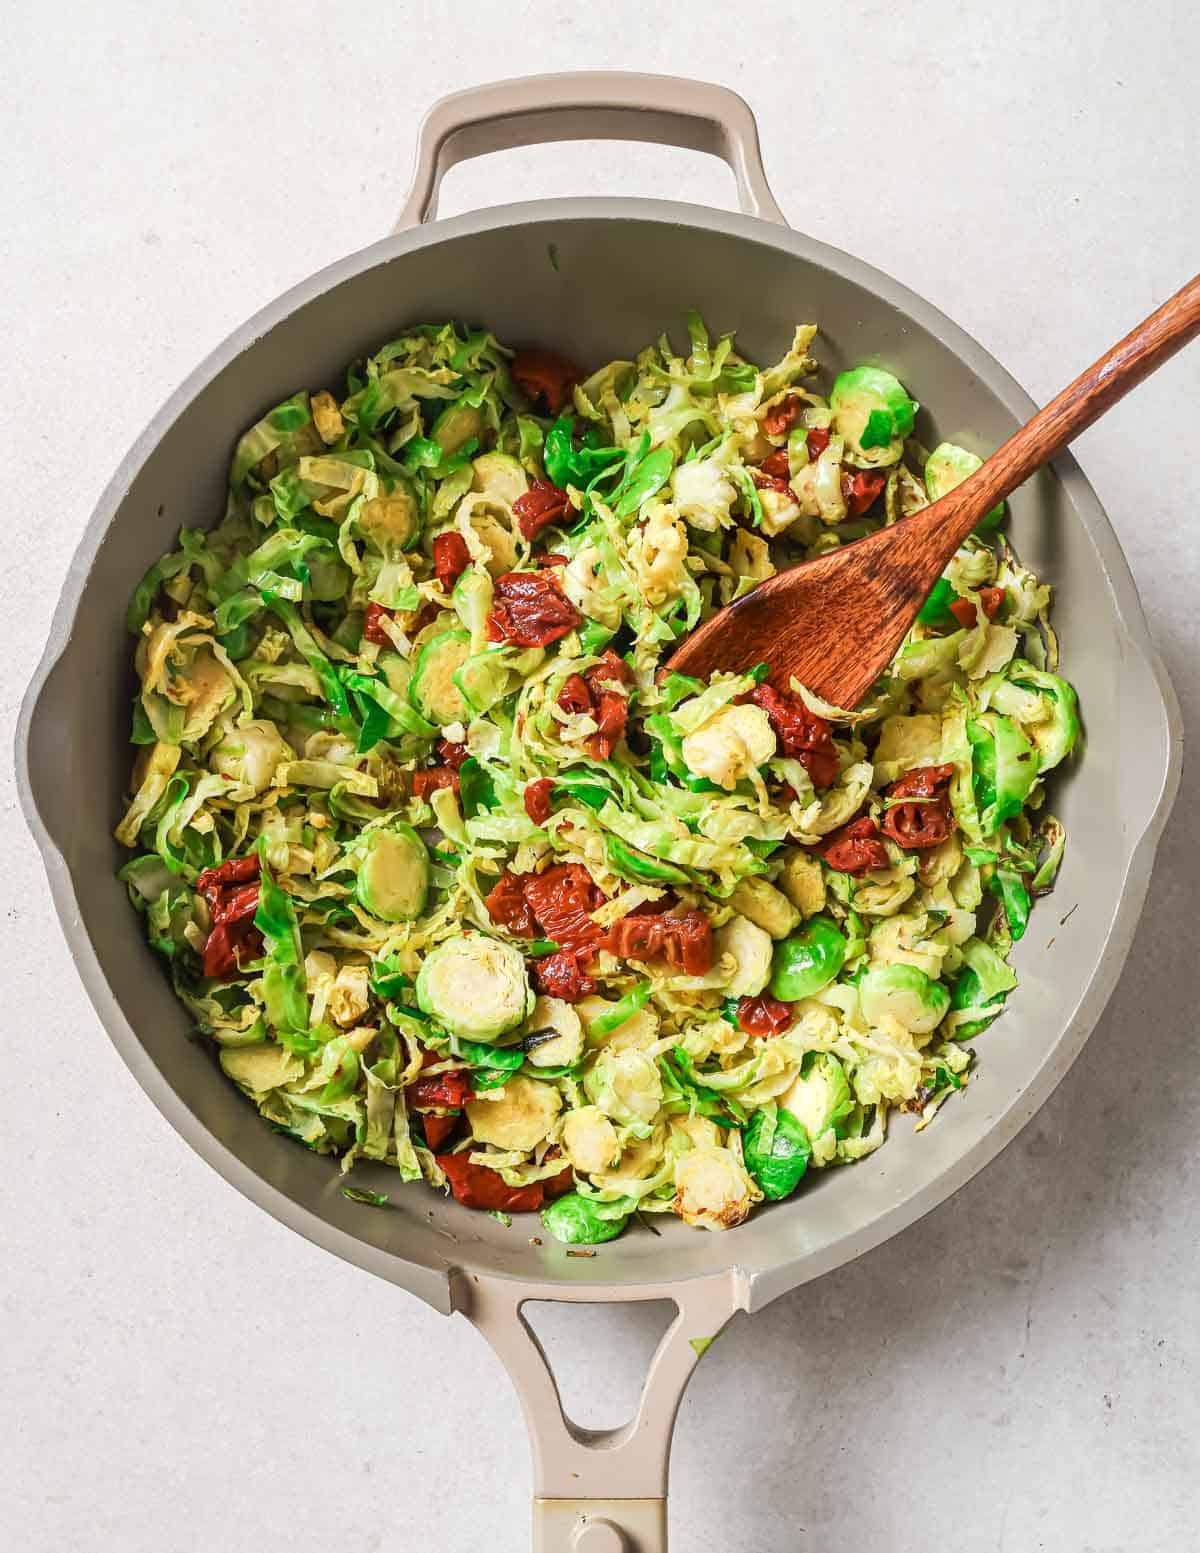 Brussels sprouts and sun-dried tomatoes in a skillet with a wooden spoon.